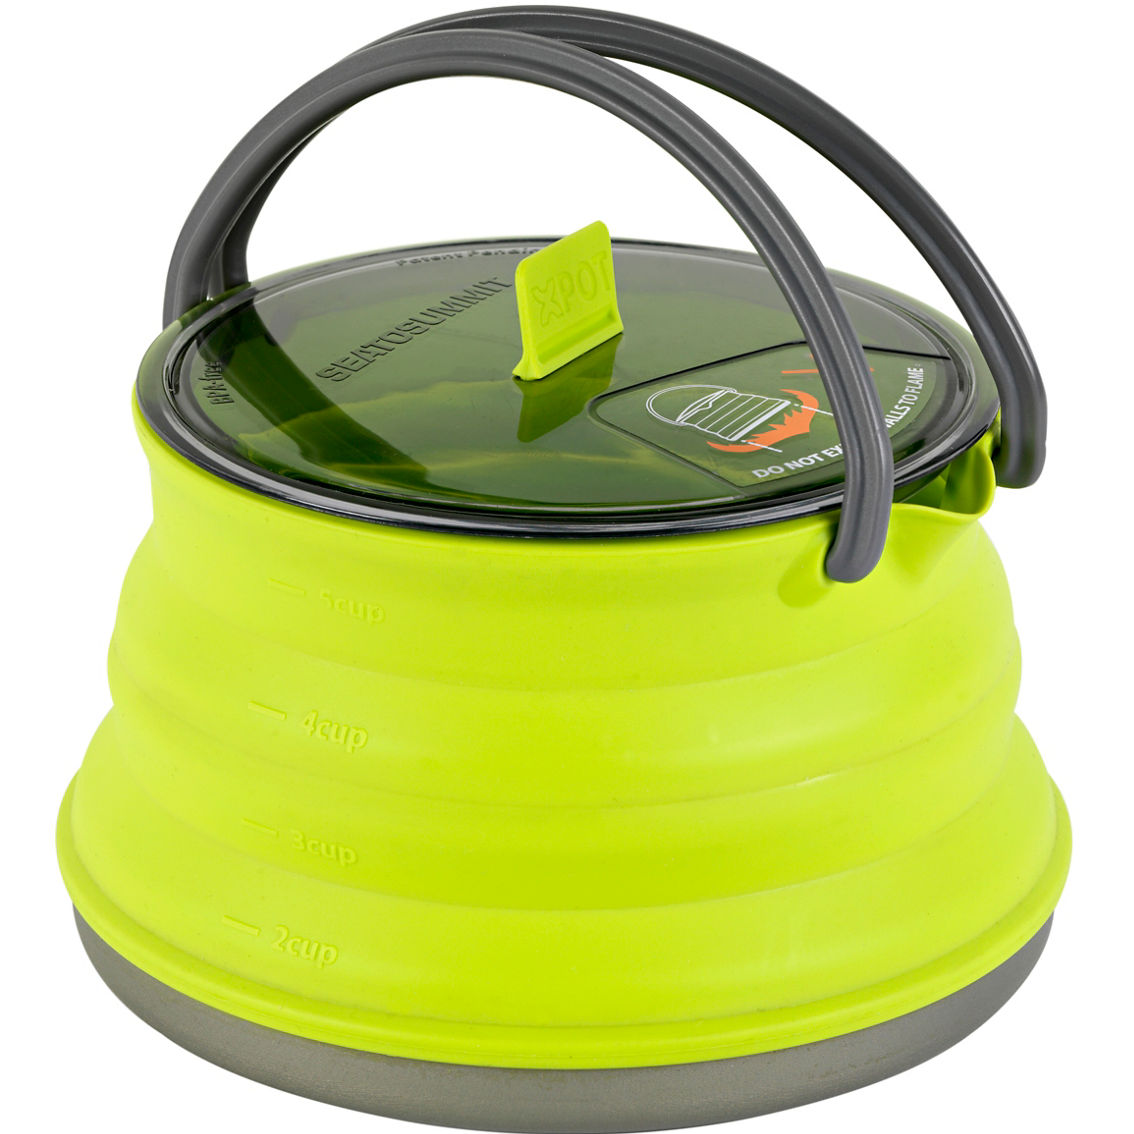 Sea to Summit X-Kettle, 1.3L, Lime - Image 3 of 4